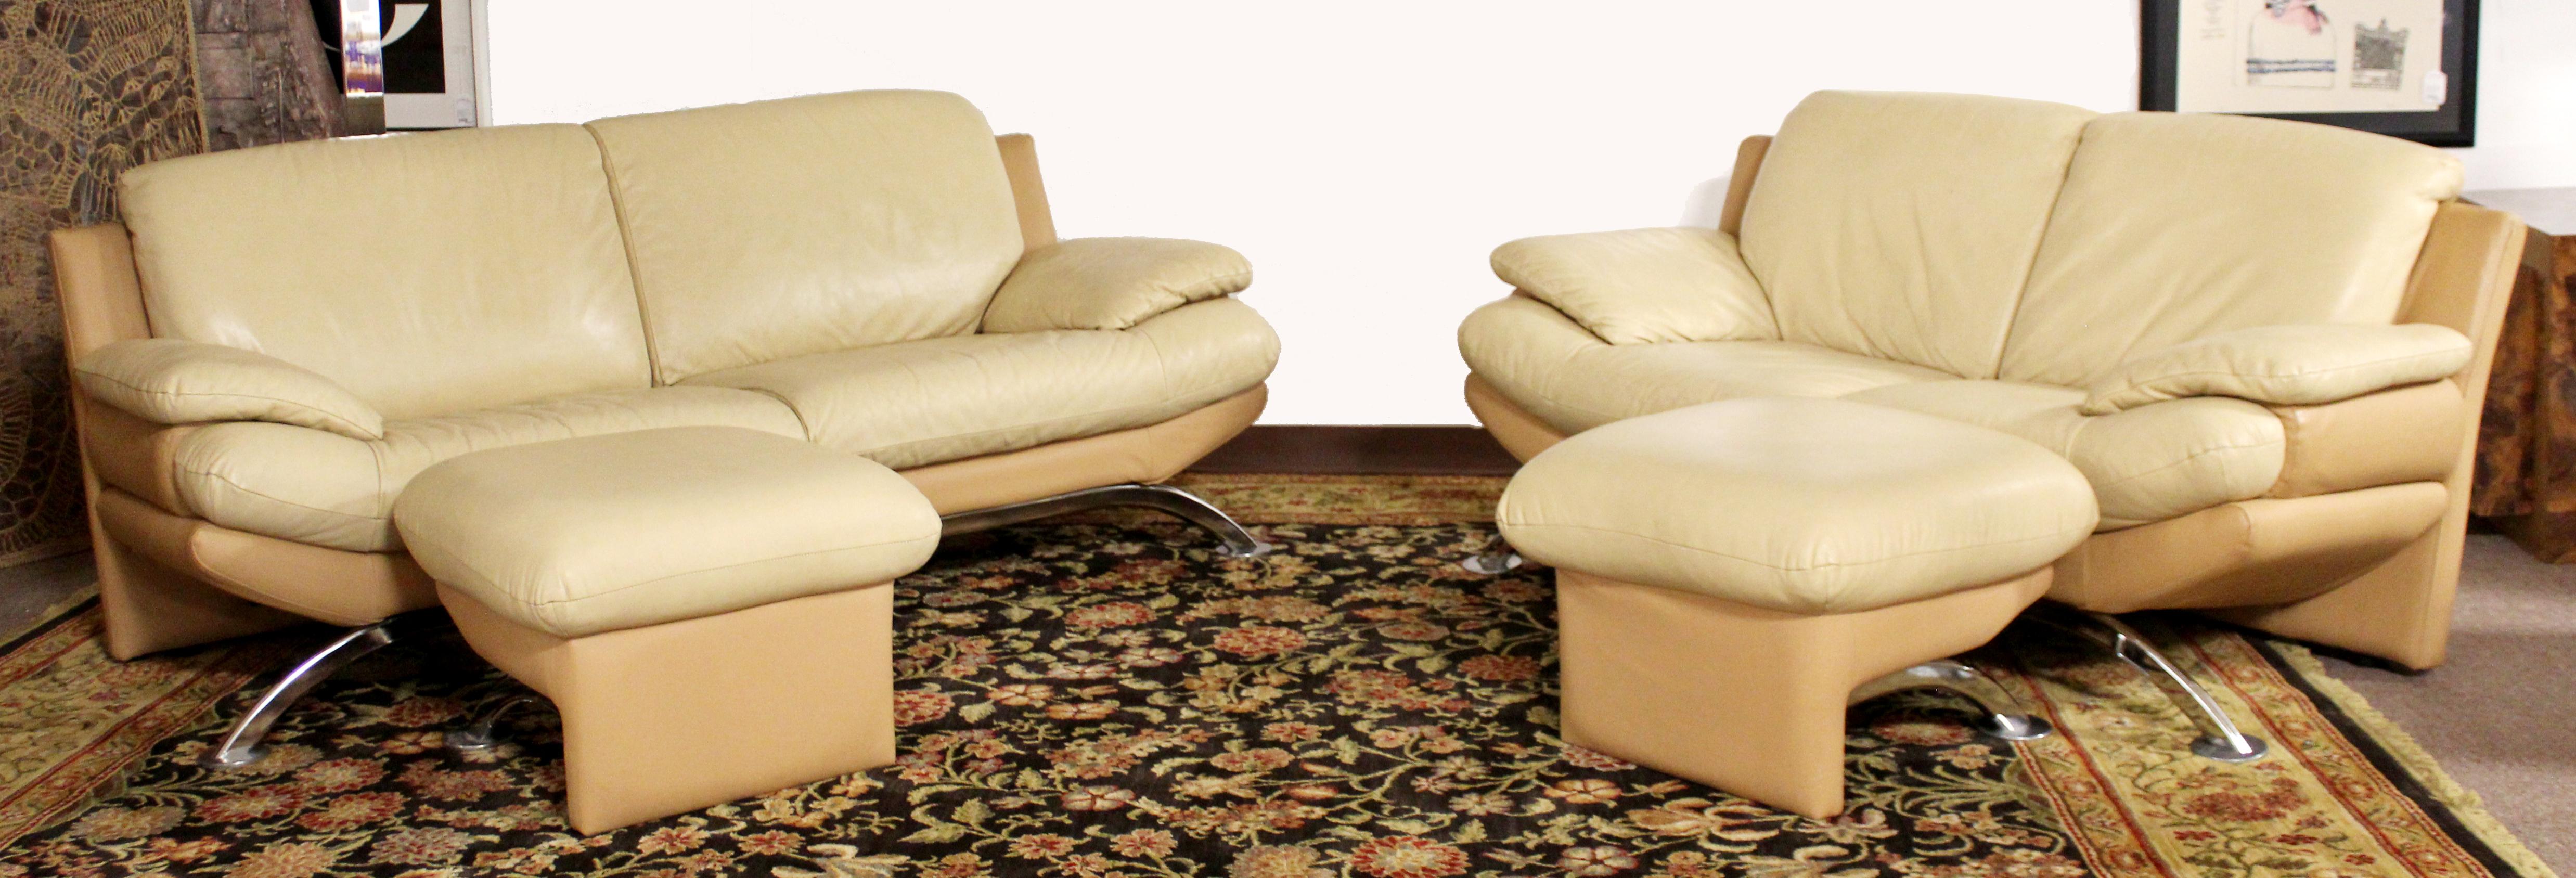 For your consideration is an incredible sofa and loveseat set, with a pair of ottomans, by Roche Bobois, circa 1980s. These pieces are upholstered in beige leather, with chrome legs. In excellent vintage condition. The dimensions are of the loveseat